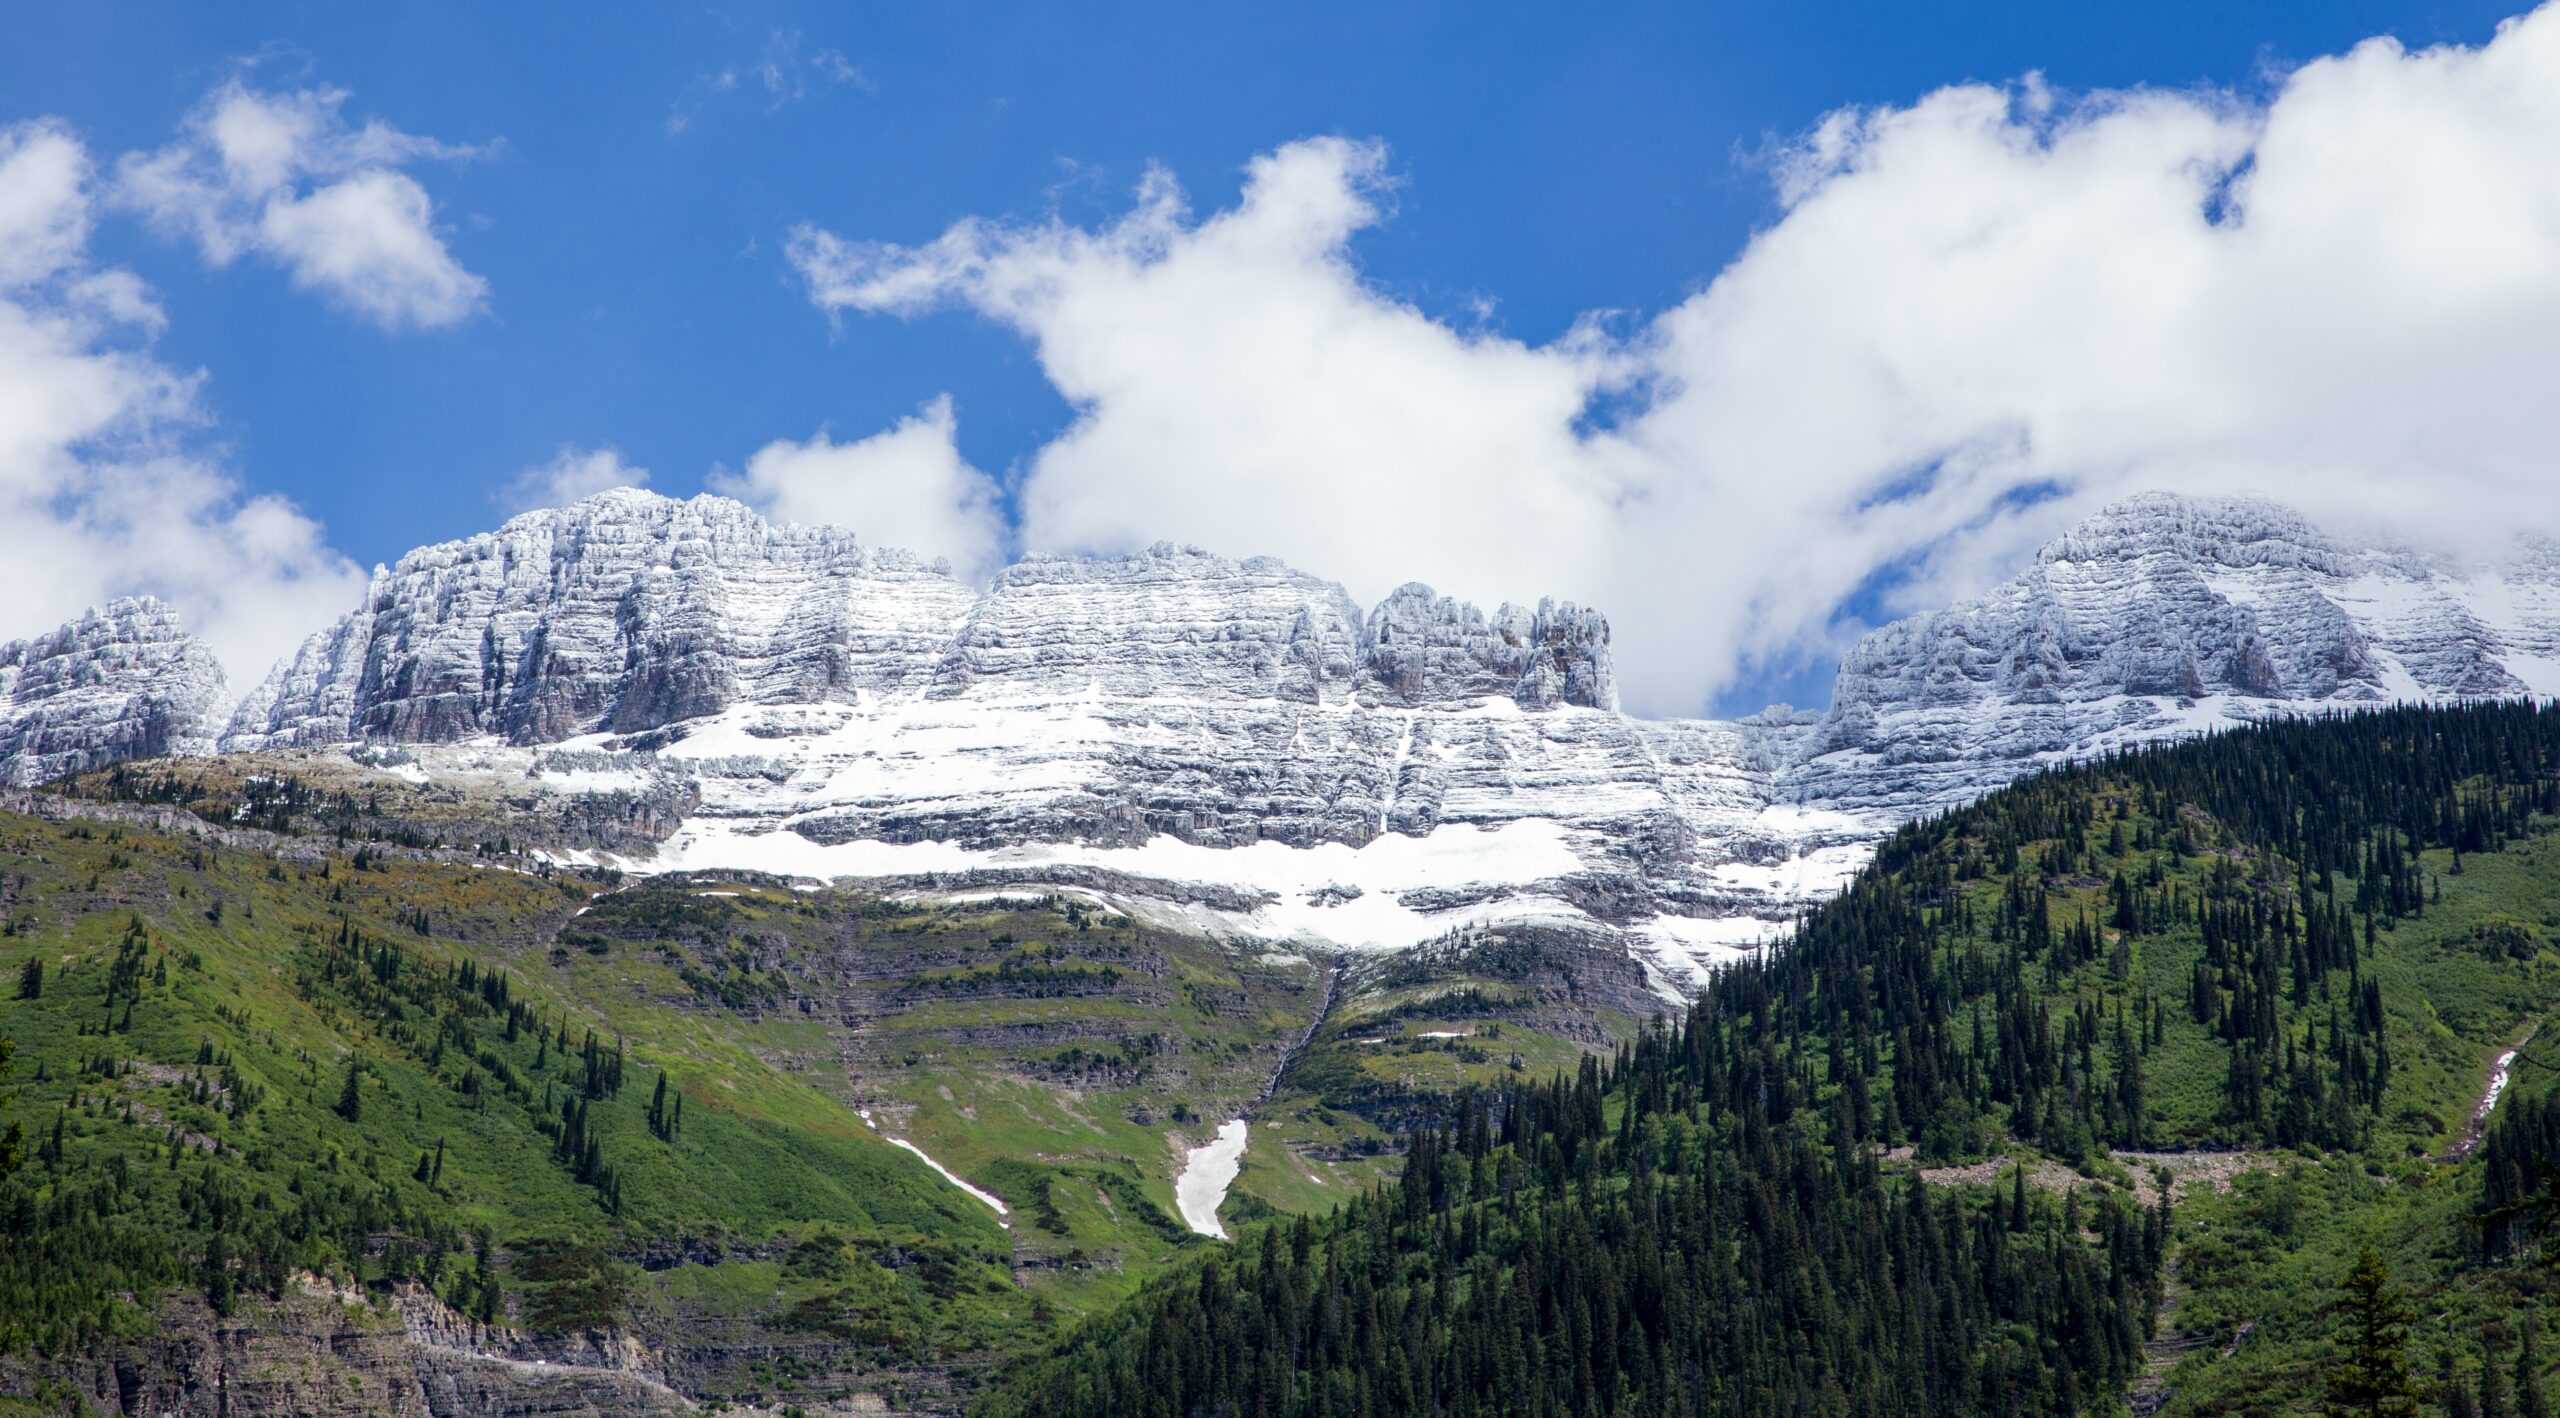 Can You Drive an RV on the Going-to-the-Sun Road?